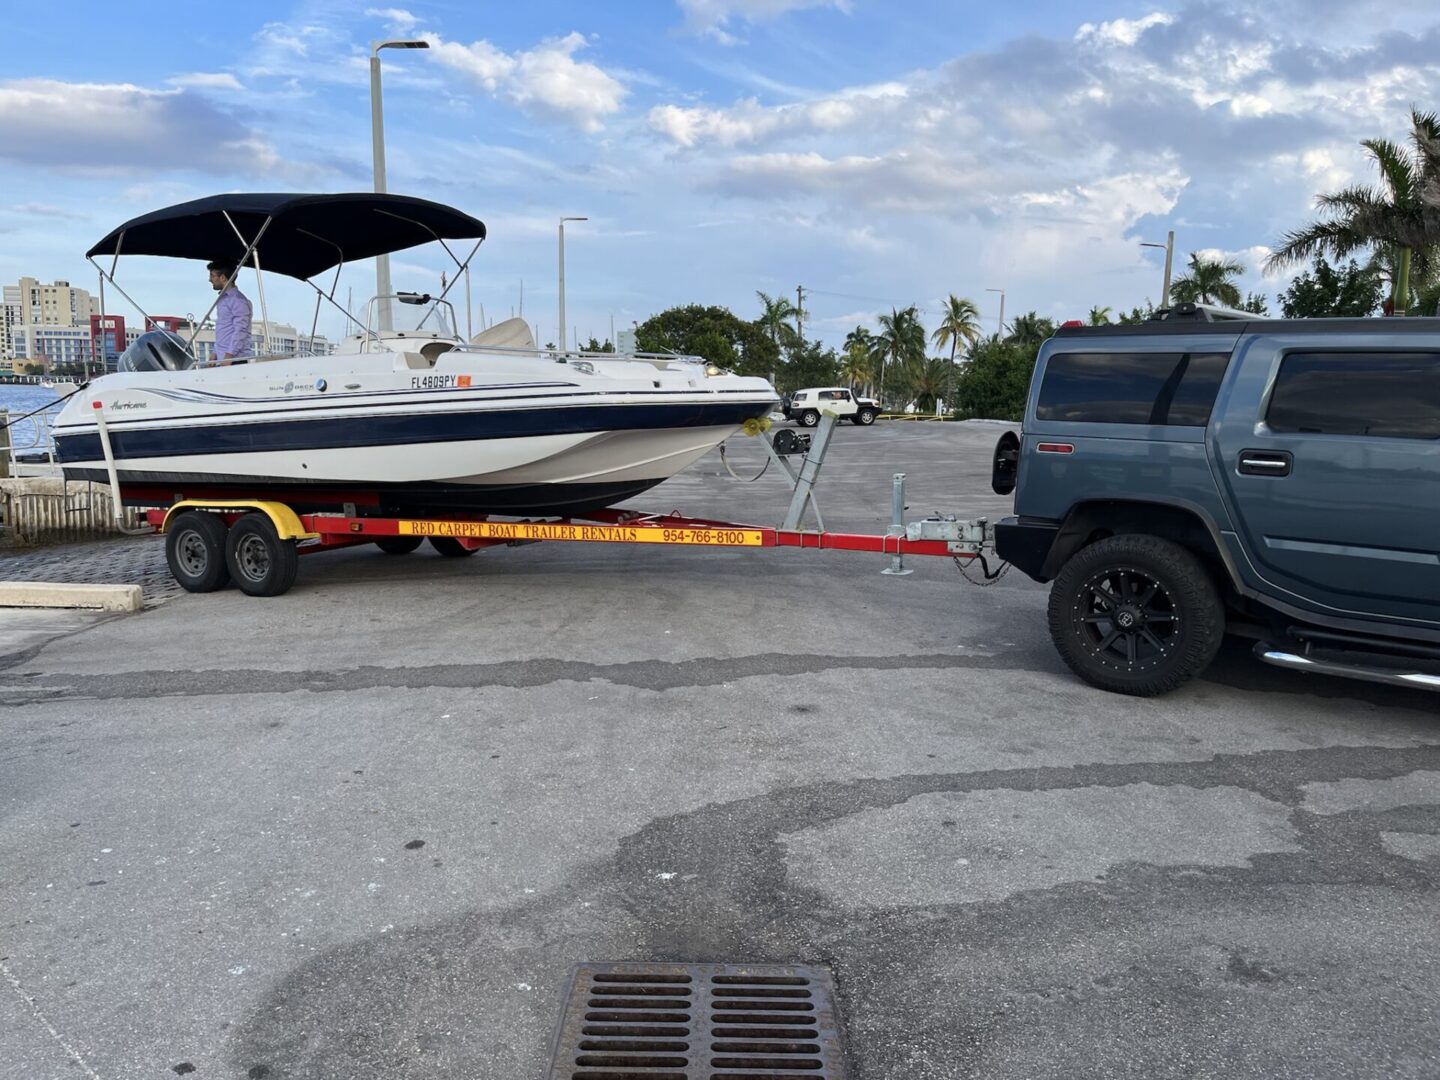 A car taking the boat trailer picture